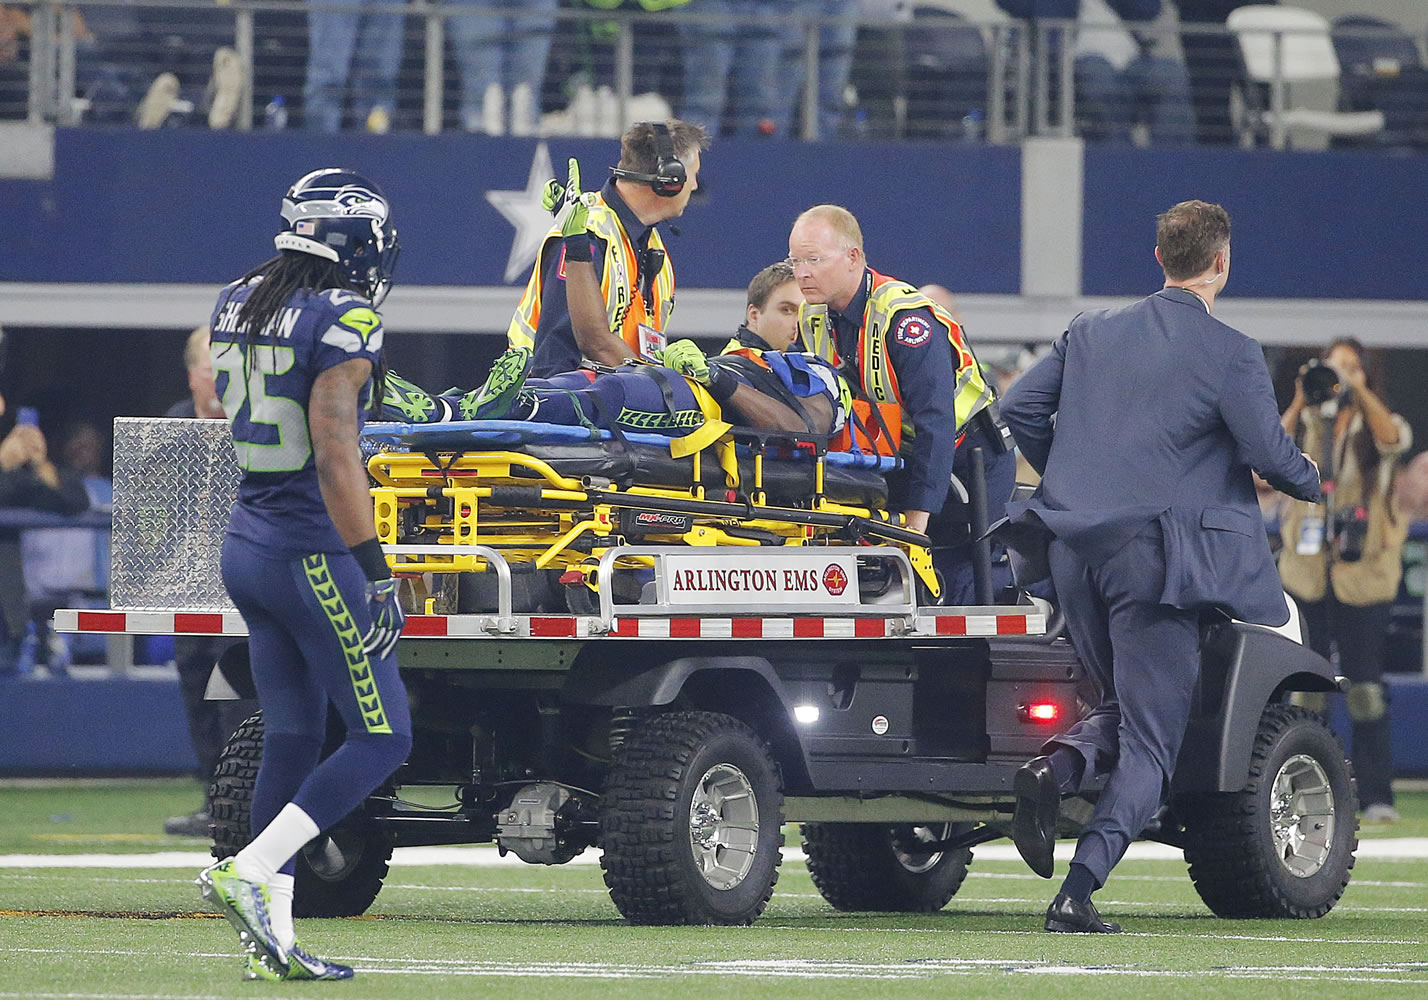 Seattle Seahawks wide receiver Ricardo Lockette (83) is carted off the field after suffering a concussion during an NFL football game against the Dallas Cowboys Sunday, Nov. 1, 2015, in Arlington, Texas.